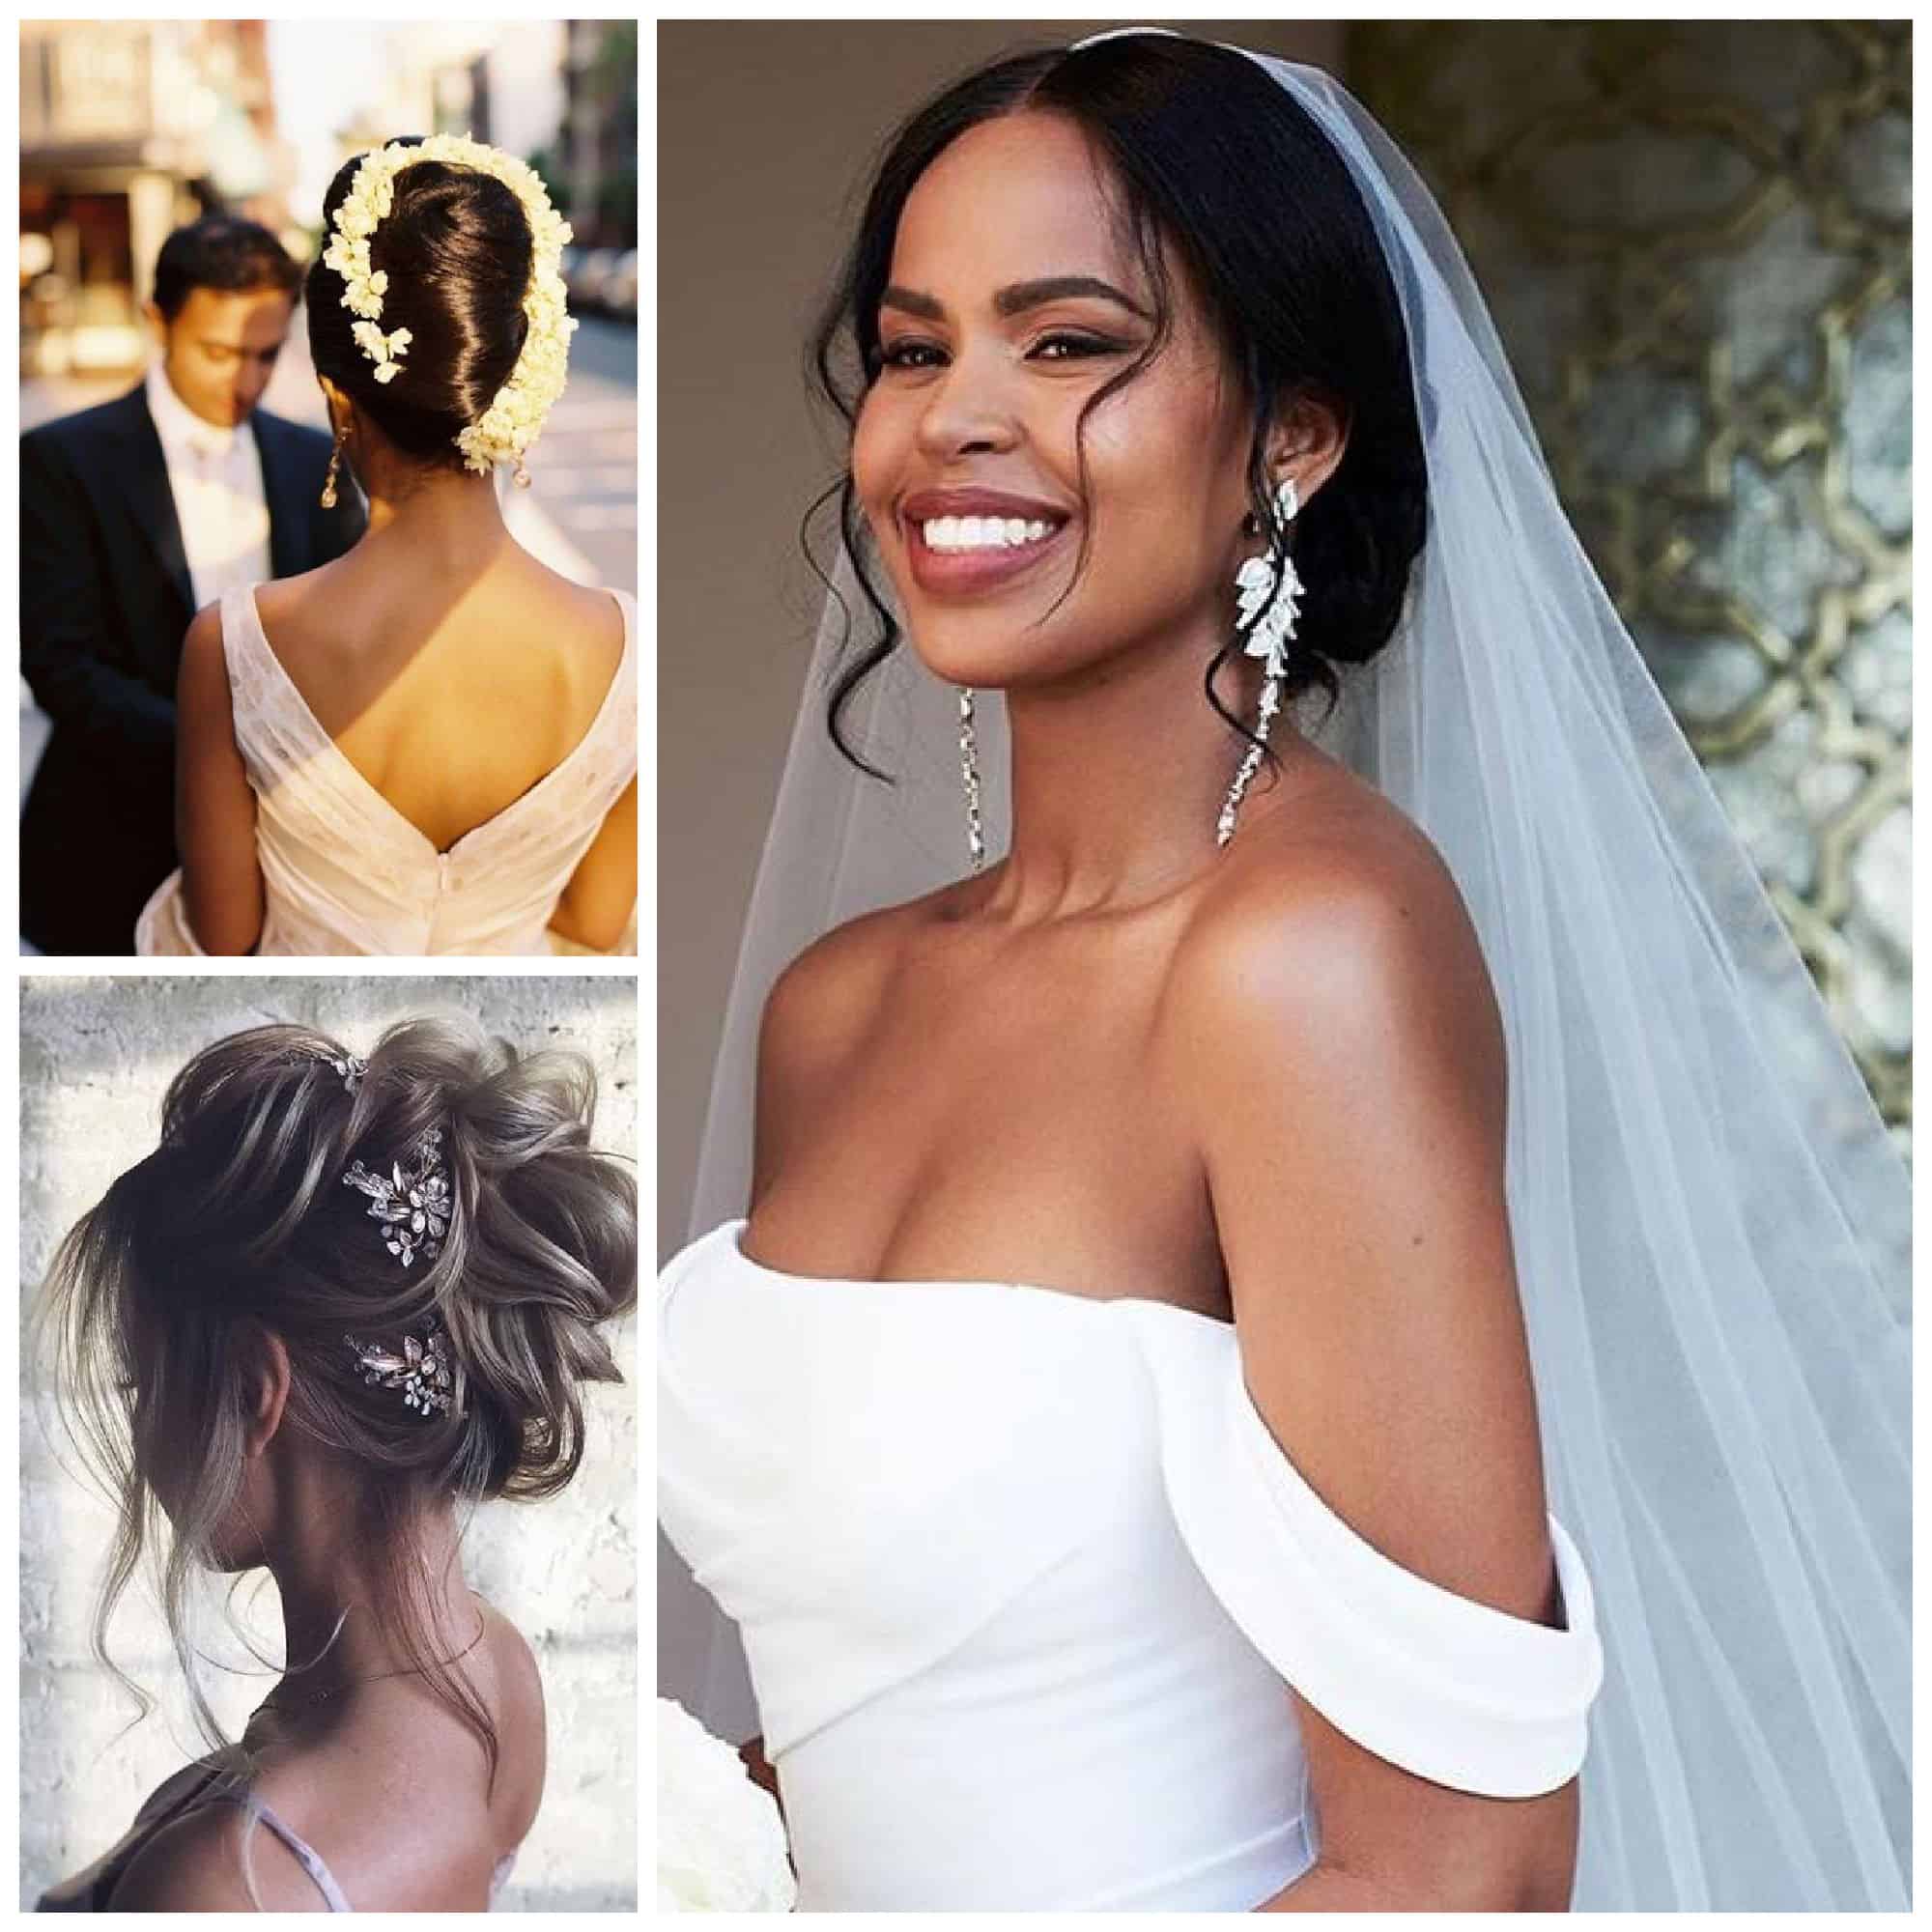 how to accessorize strapless dress - Google Search | Wedding hair  inspiration, Bridesmaid hair, Strapless dress hairstyles